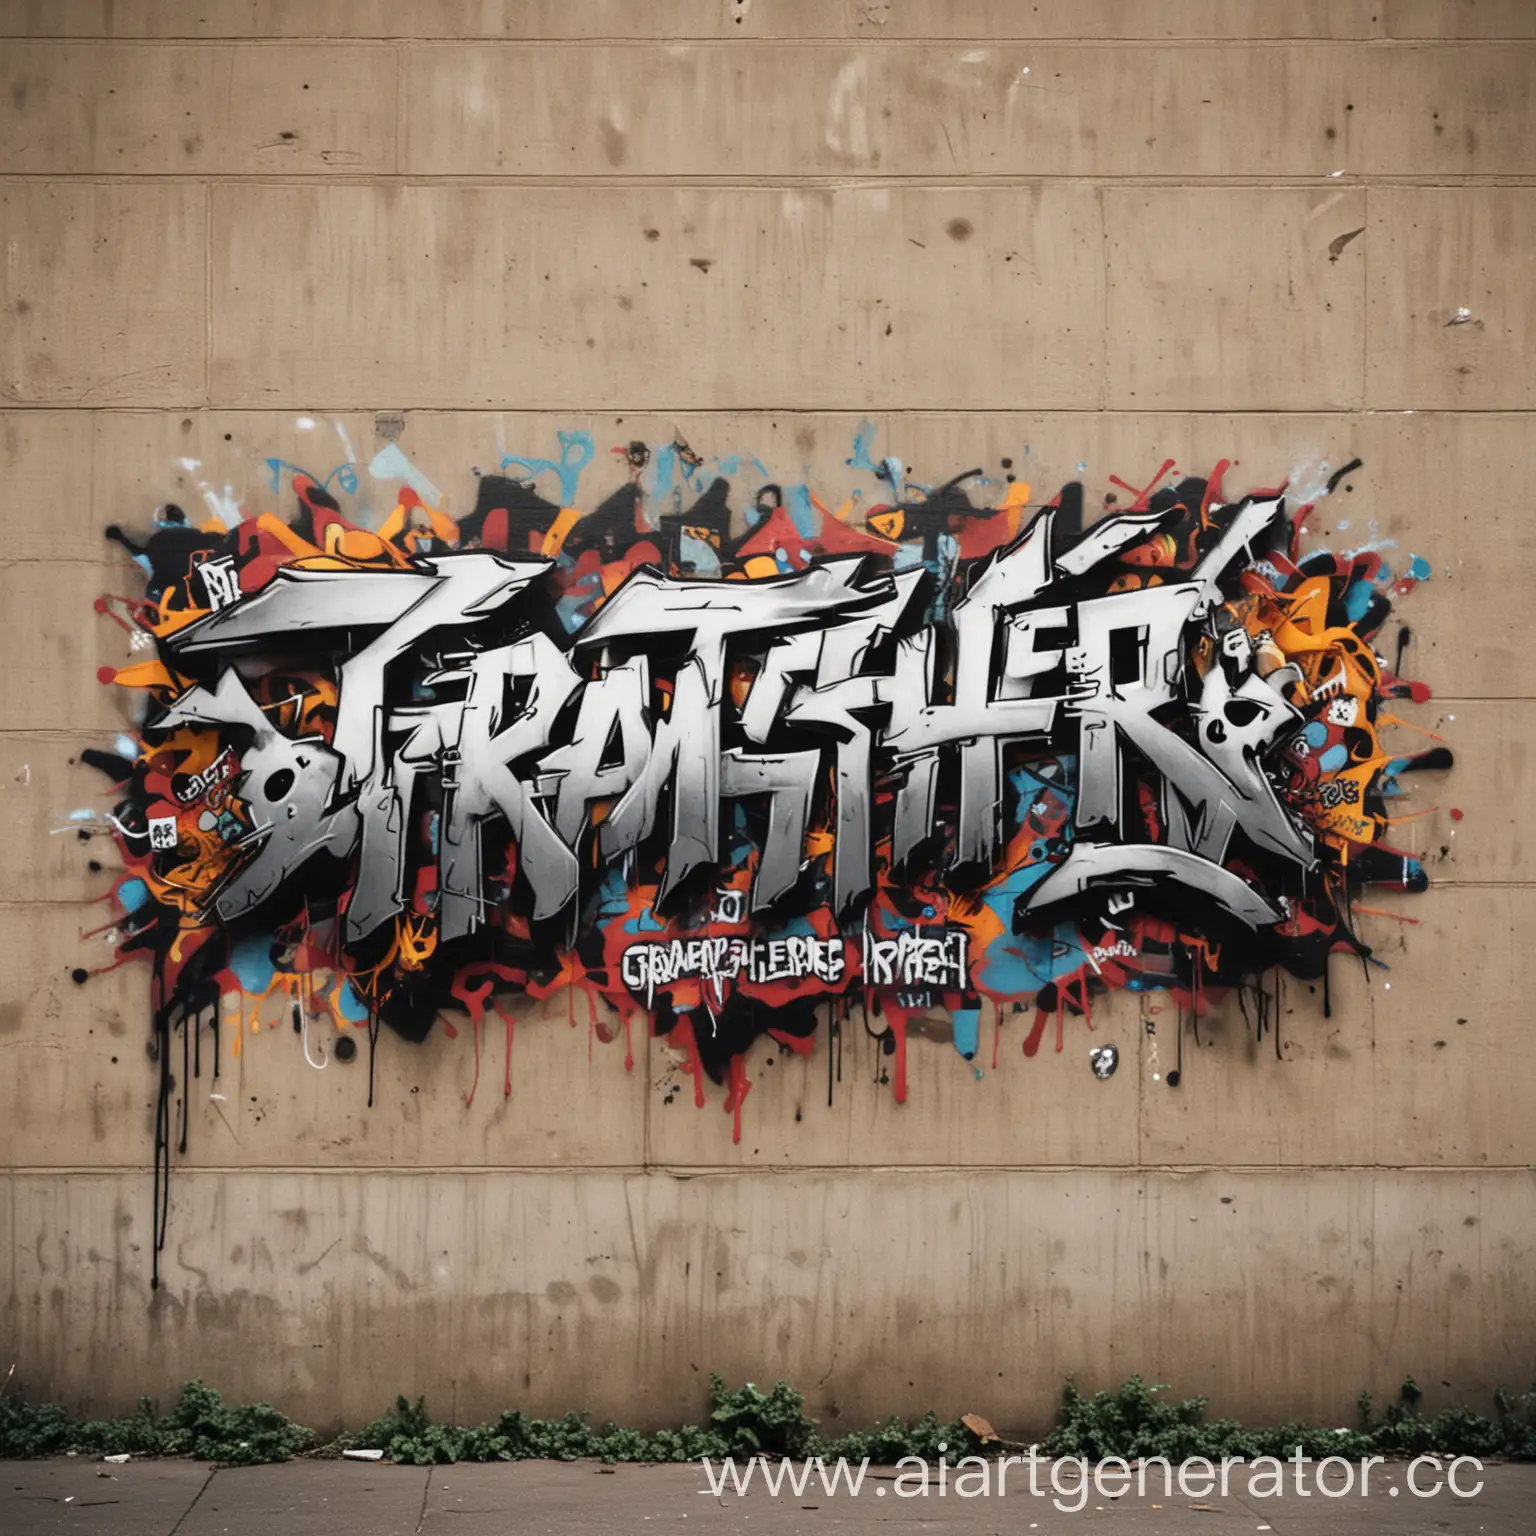 a preview graffiti and skate details style like a thrasher , just not put people on imagenes put board where it obligatory  says graveshop.md x bezuwko.store.md 